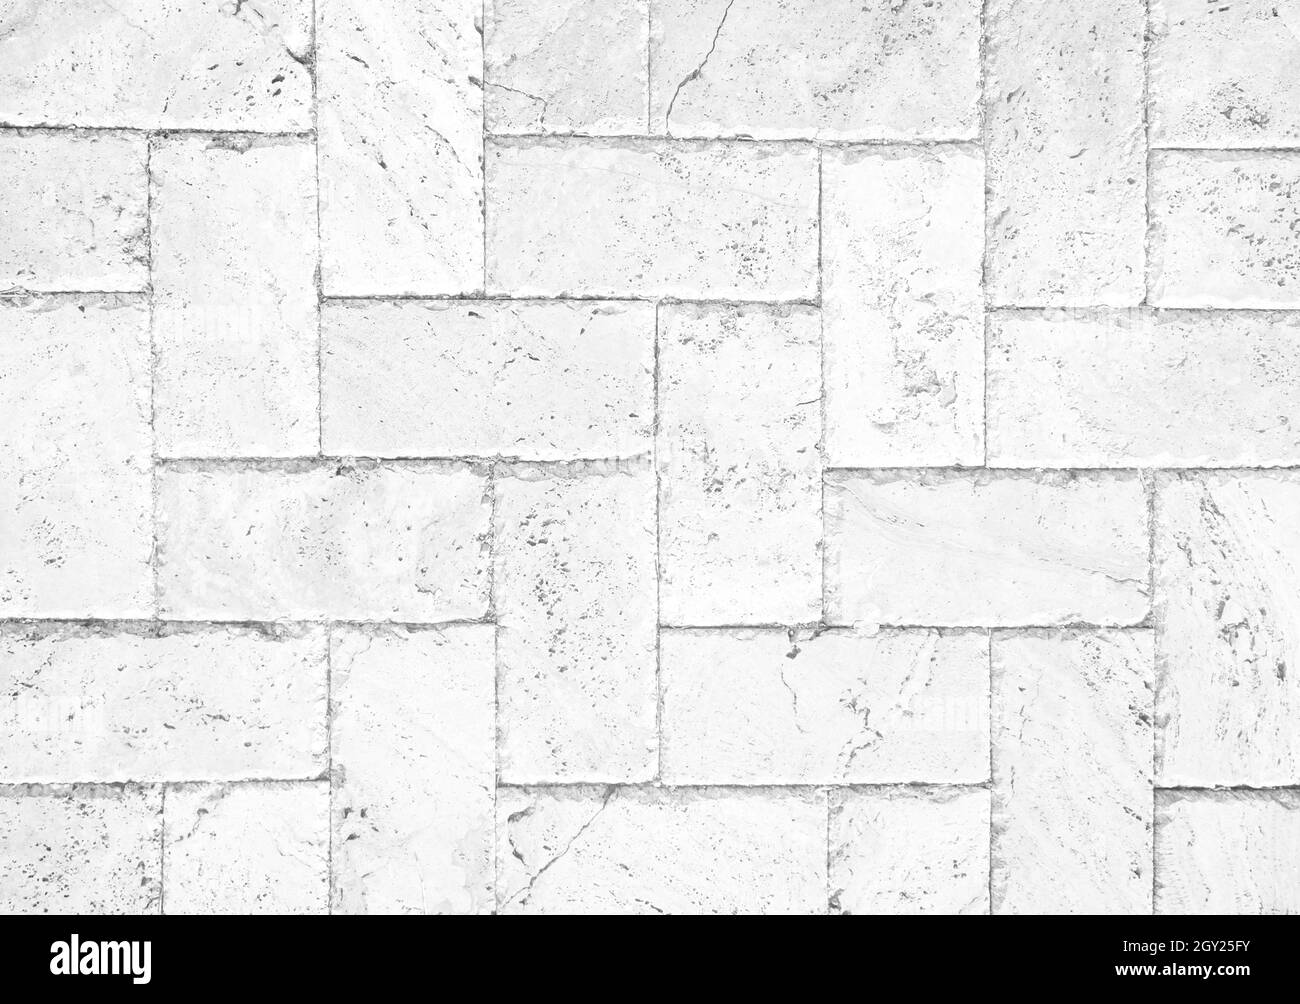 Gray white brick sidewall pavers. Stones laid down on ground pavement walkway. Building texture flat wall. Stock Photo